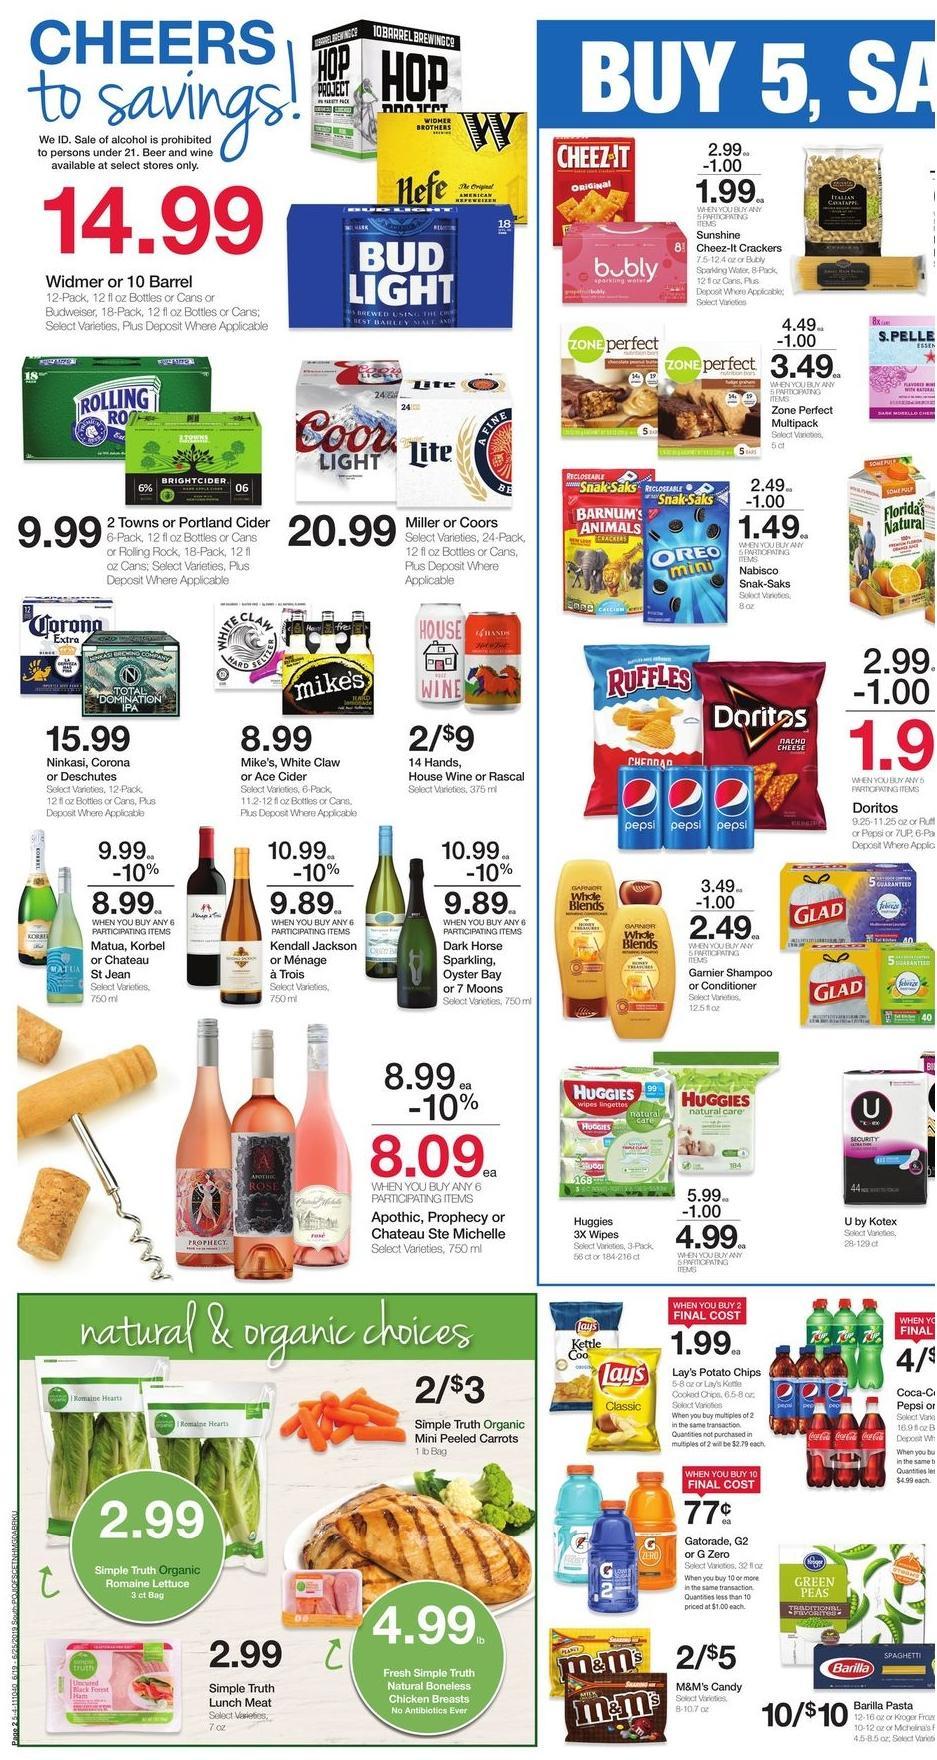 Fred Meyer Weekly Ad from June 19